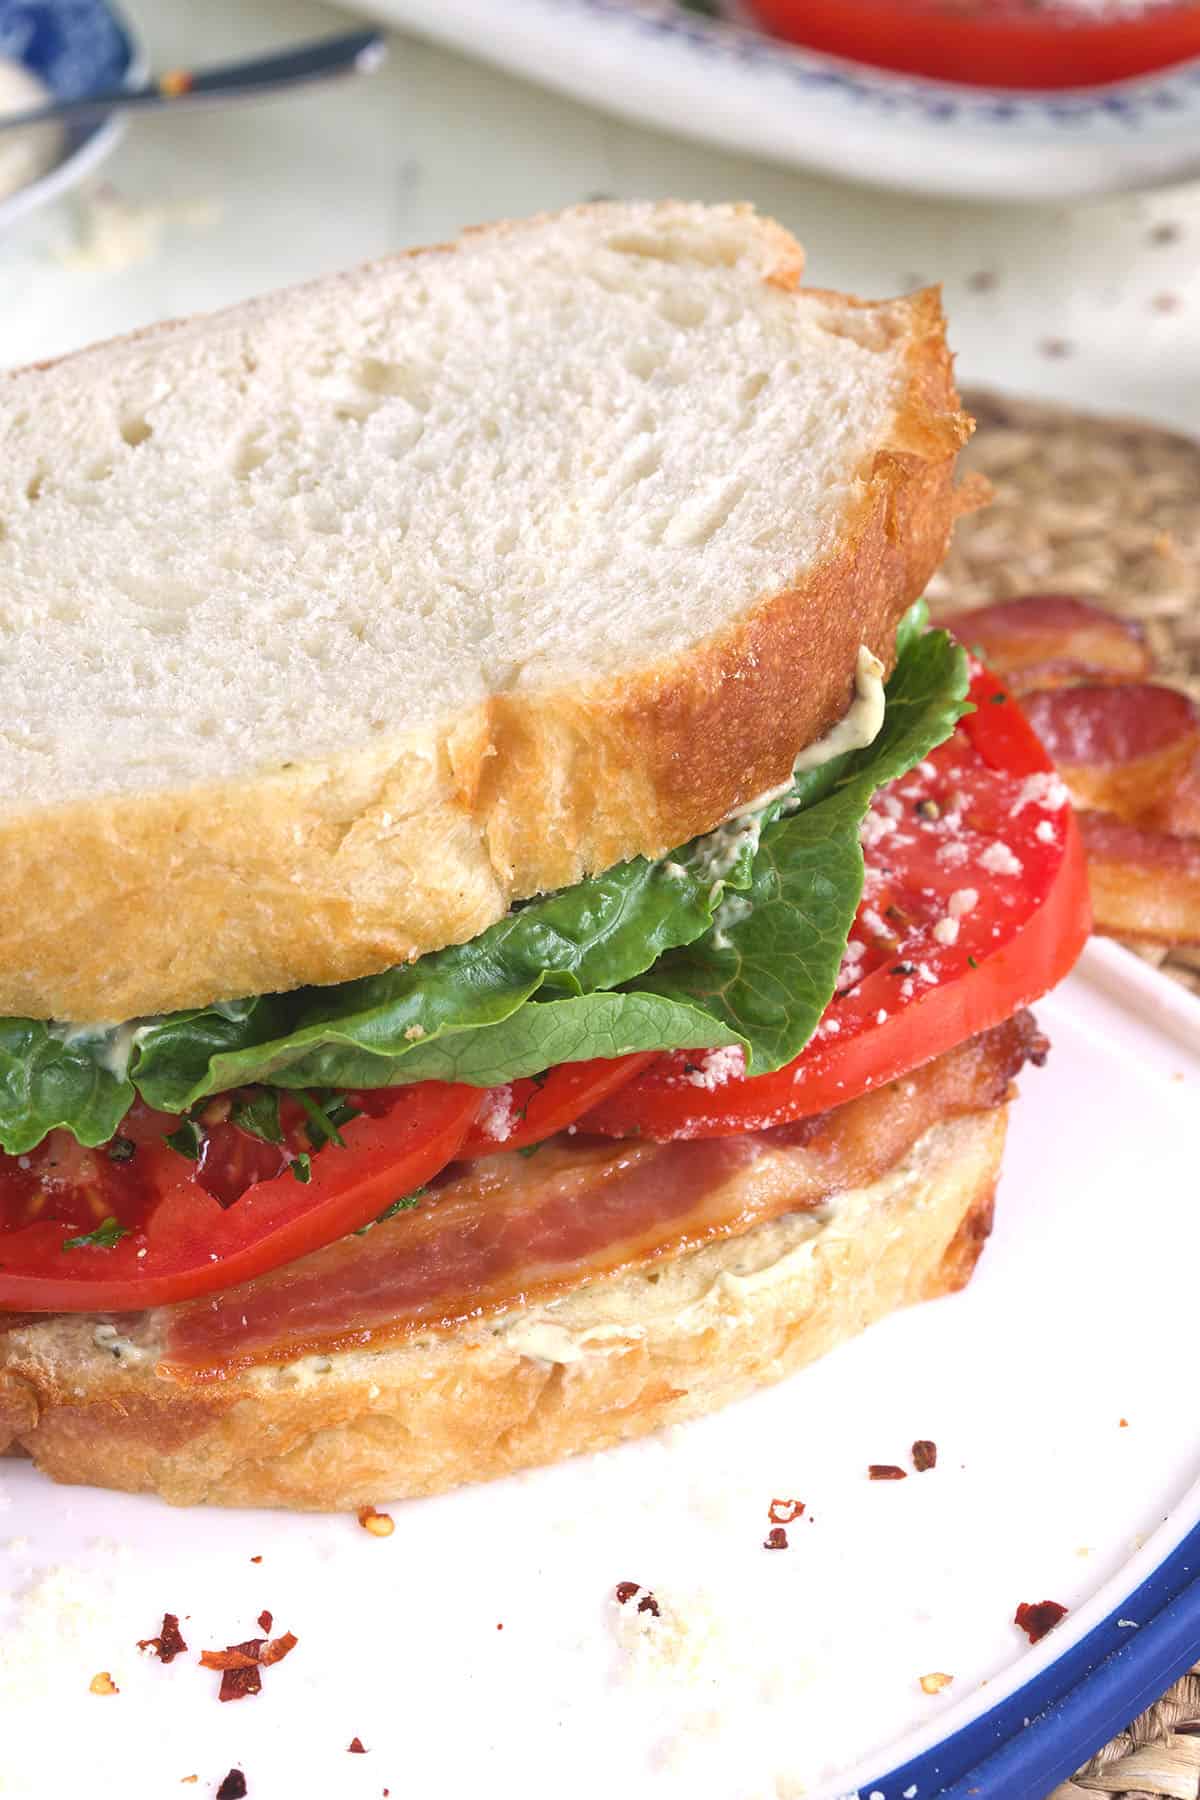 BLT sandwich on white bread positioned on a cutting board.